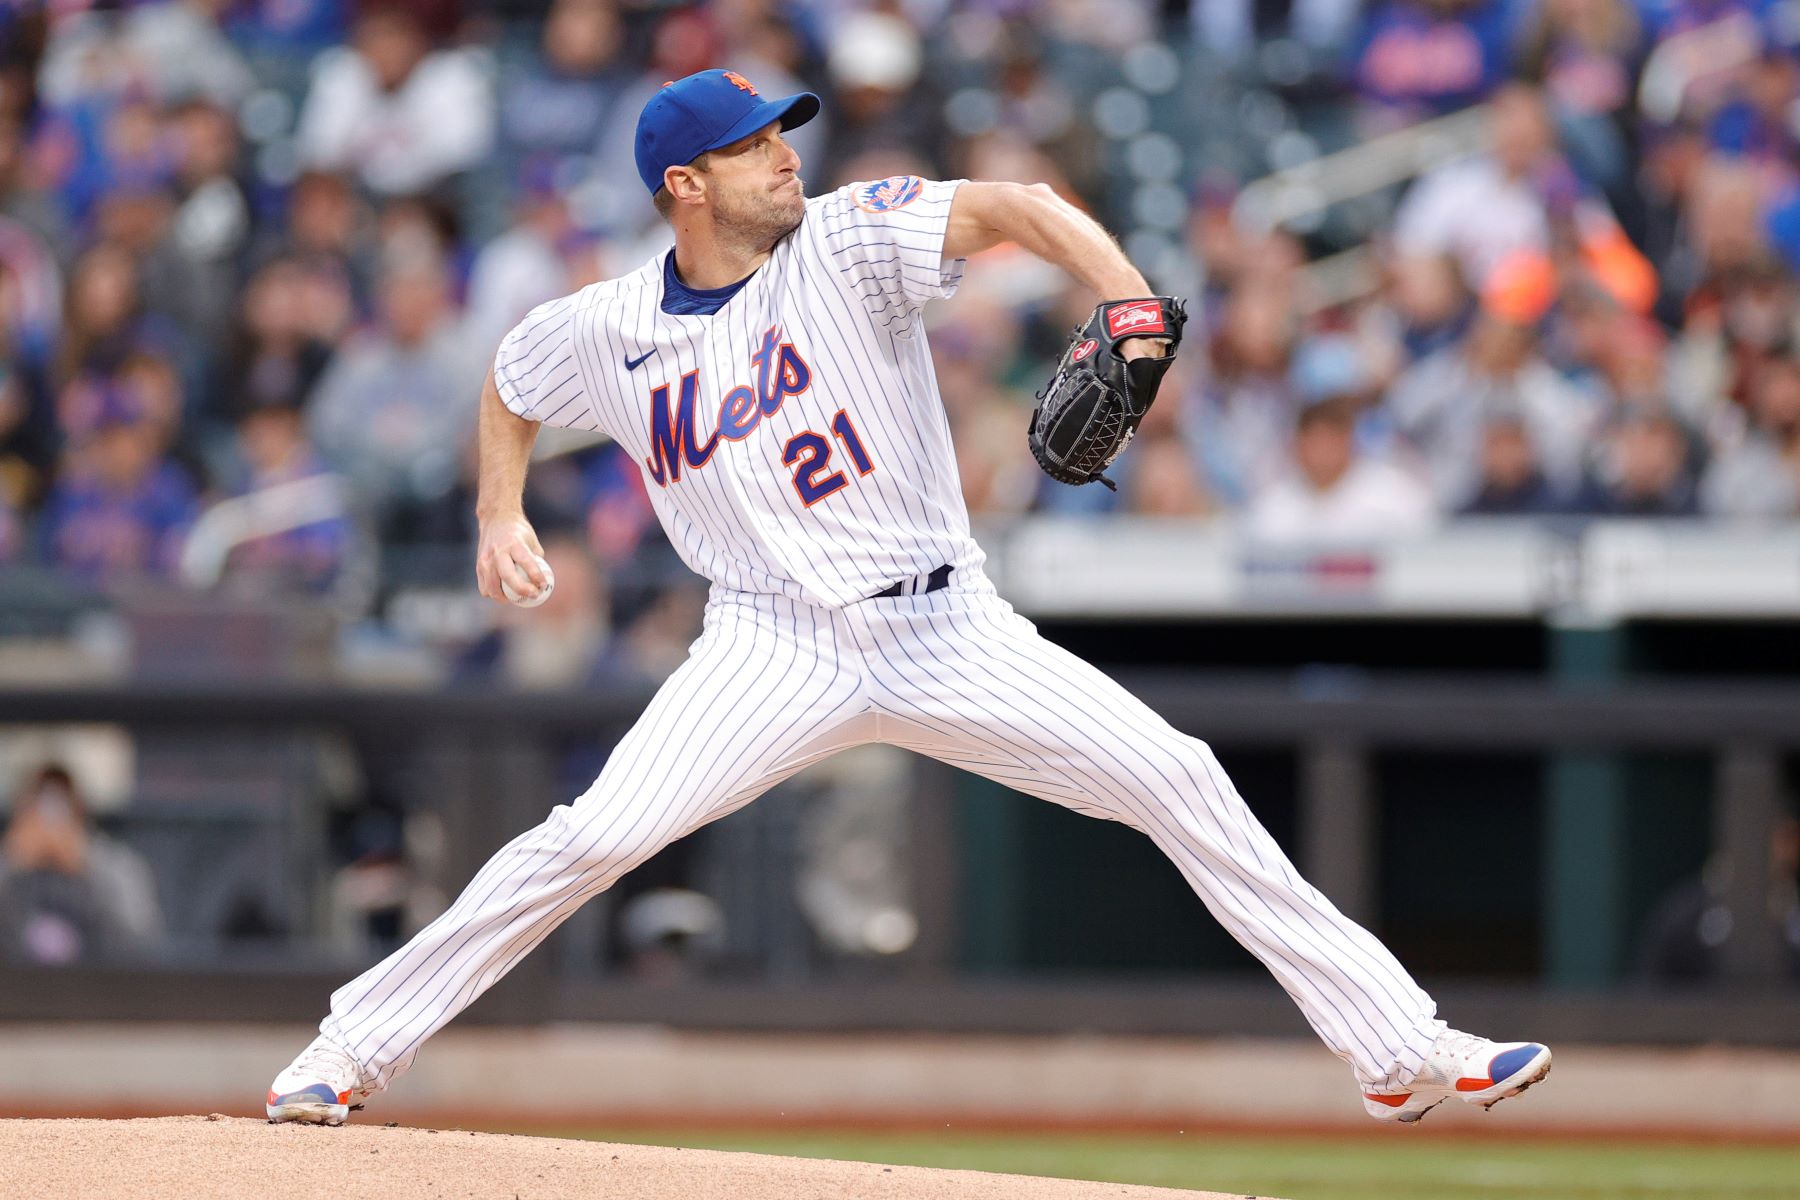 Max Scherzer #21 of the New York Mets pitching during an MLB game against the Philadelphia Phillies at Citi Field